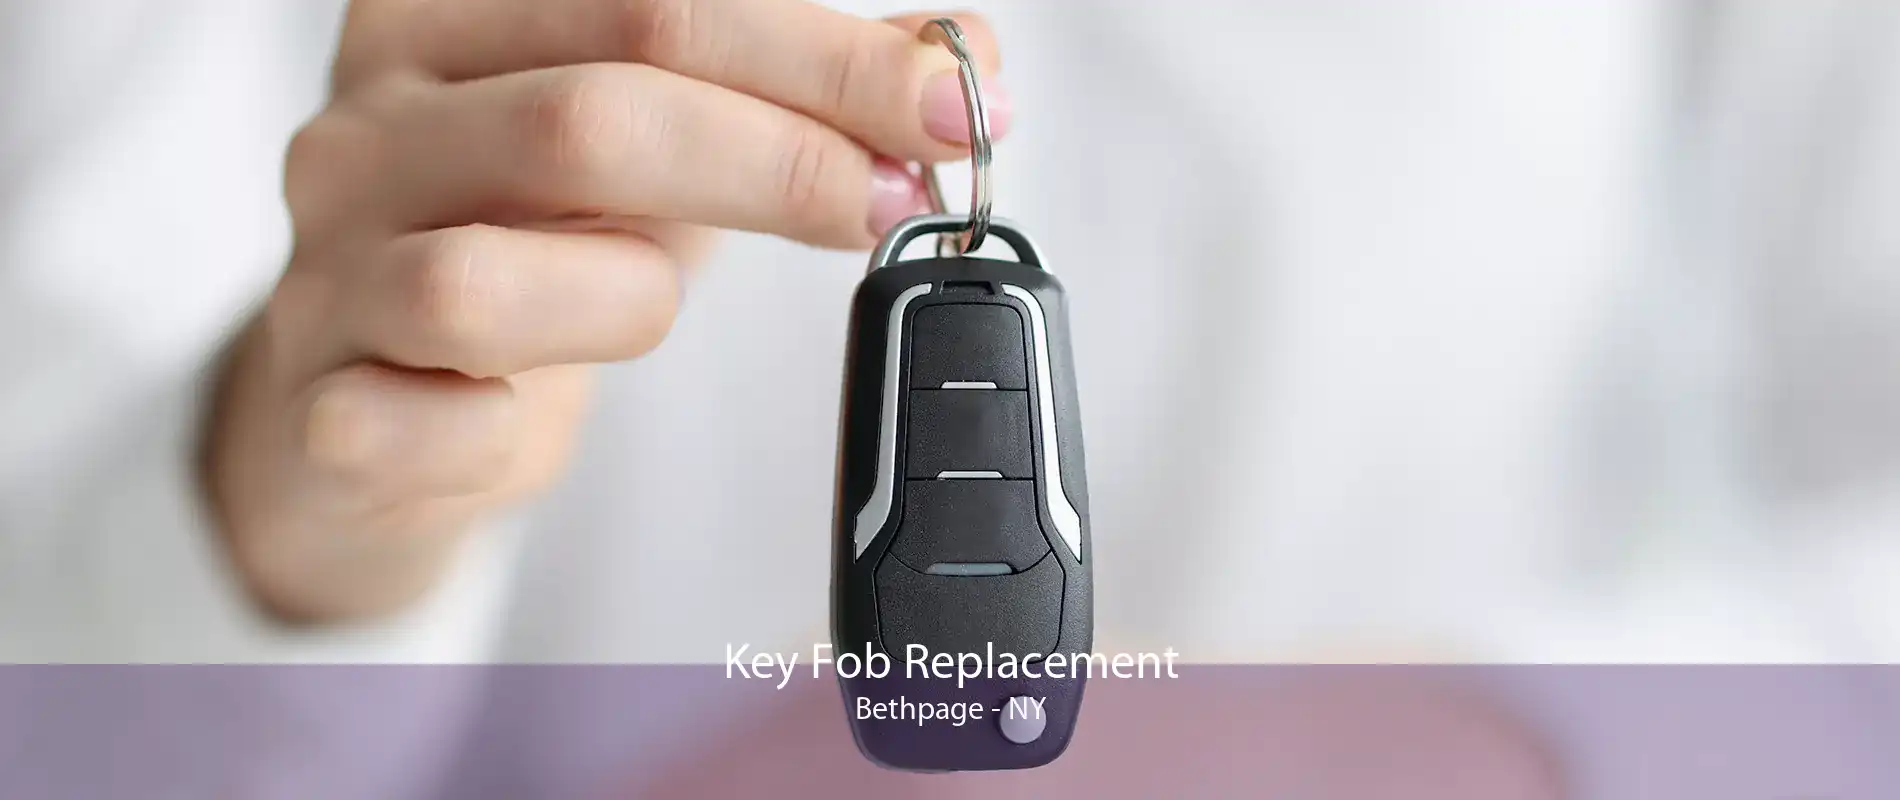 Key Fob Replacement Bethpage - NY